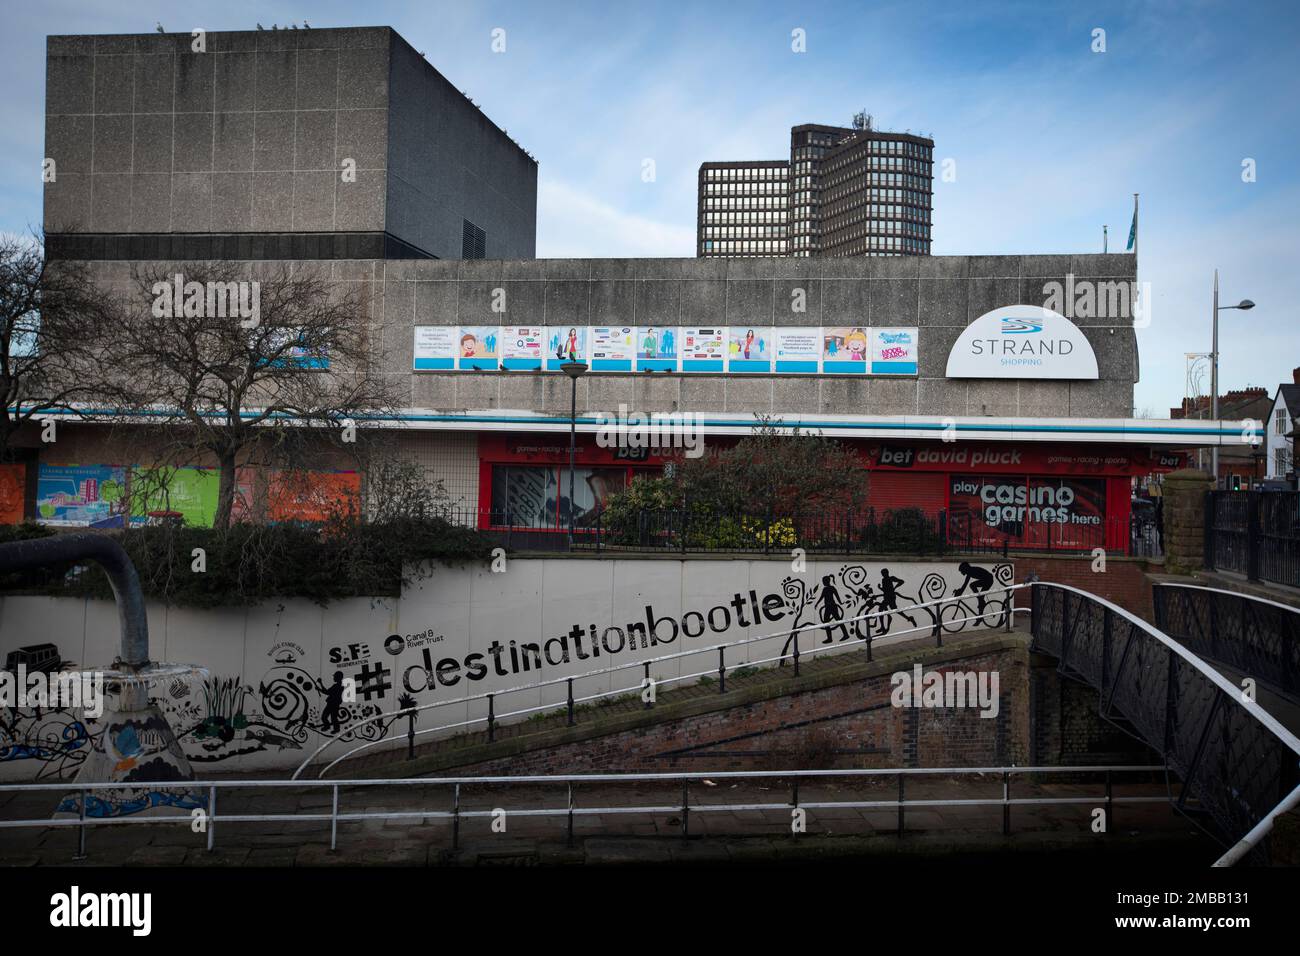 A mural on a wall on the side of the Strand shopping centre next to the Liverpool-Leeds Canal in the town of Bootle, Sefton, which adjoins the city of Liverpool. It was announced in 2015 that the HMRC was set to close its office at Triad House in Bootle, which it was feared would result in job losses in the town. The facility was eventually wound-up in late 2021. Image to illustrate feature on the UK Government’s so-called levelling up agenda. Stock Photo